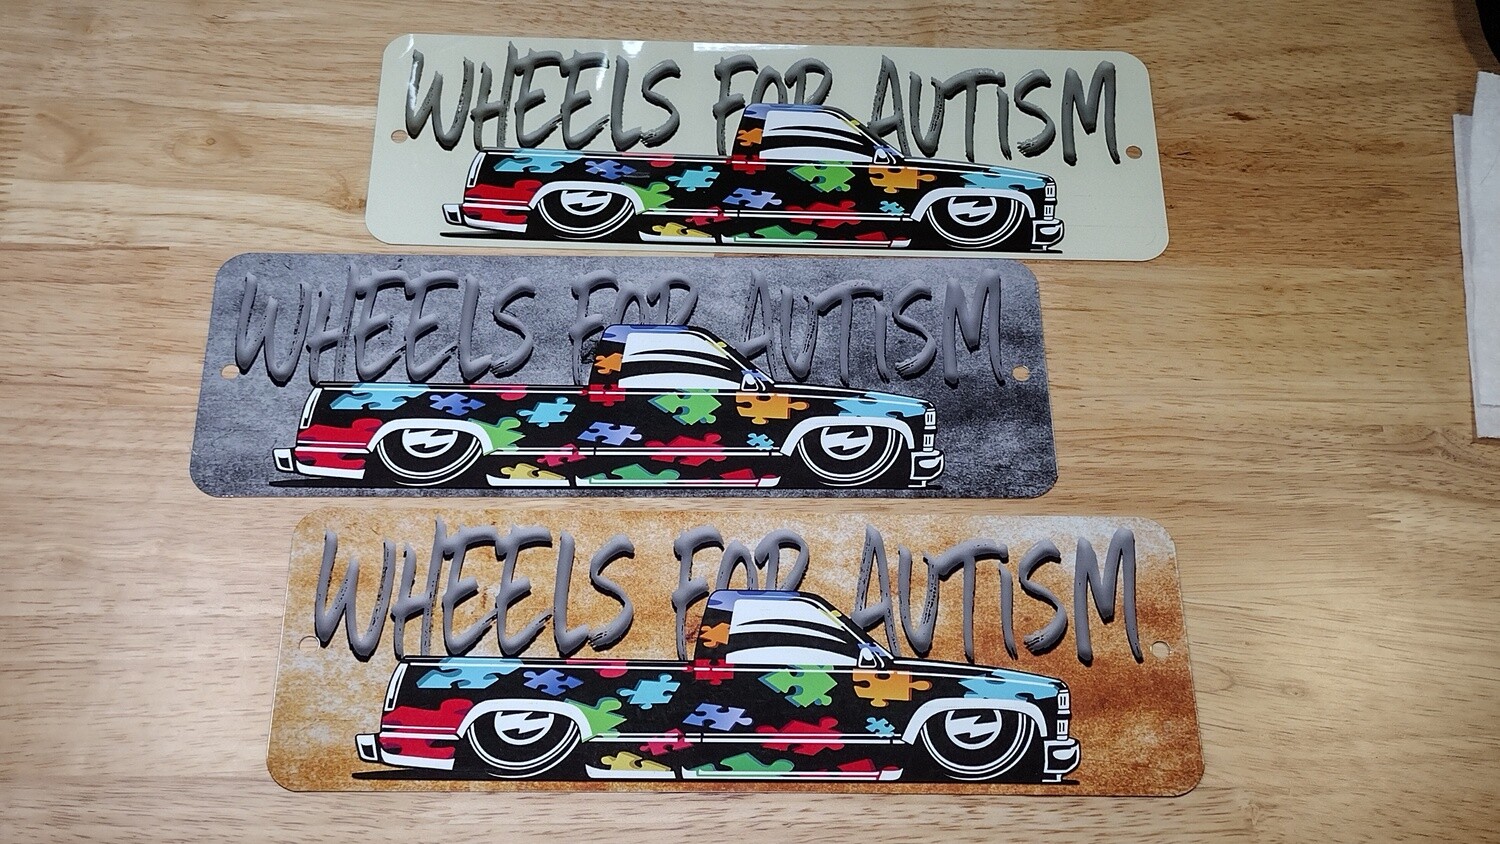 Wheels for Autism sign